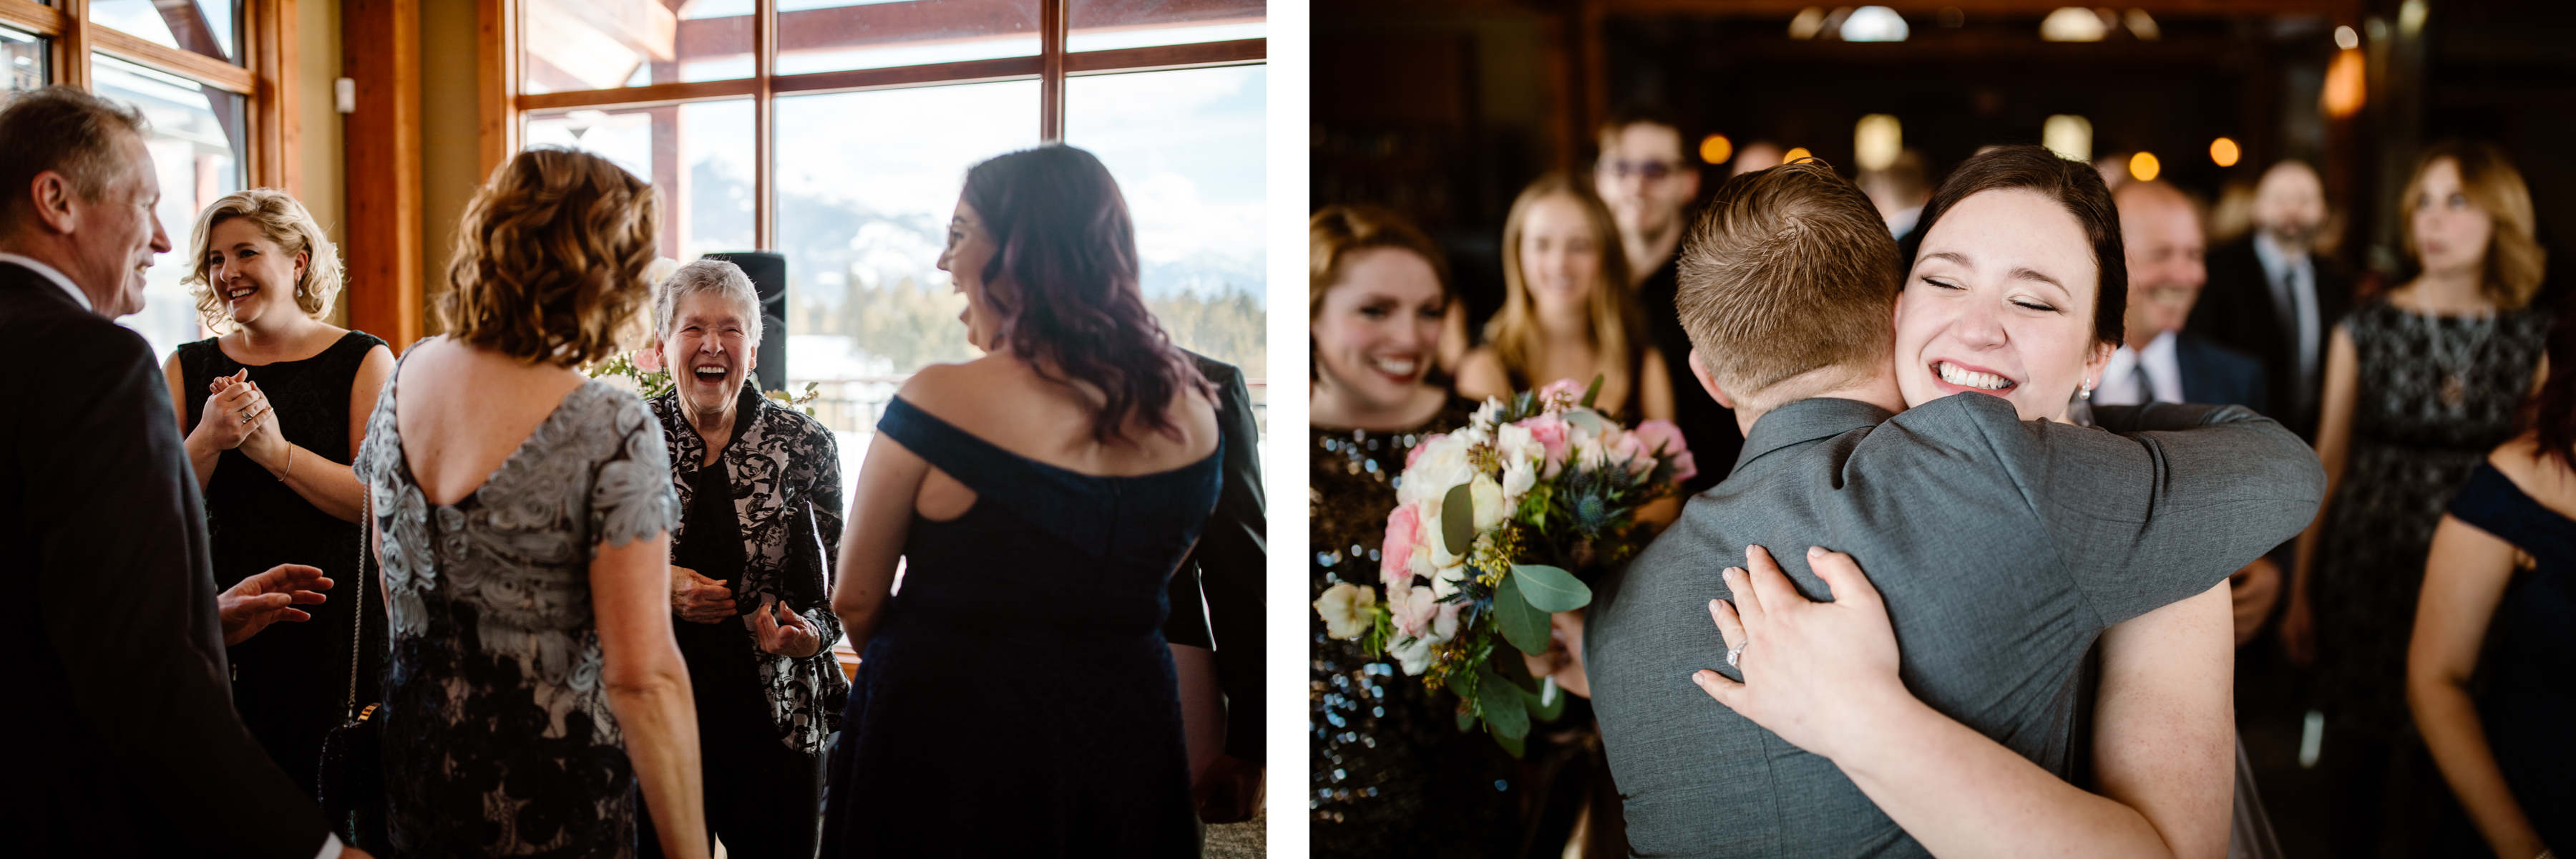 Invermere Wedding Photographers at Eagle Ranch and Panorama Ski Resort - Image 33